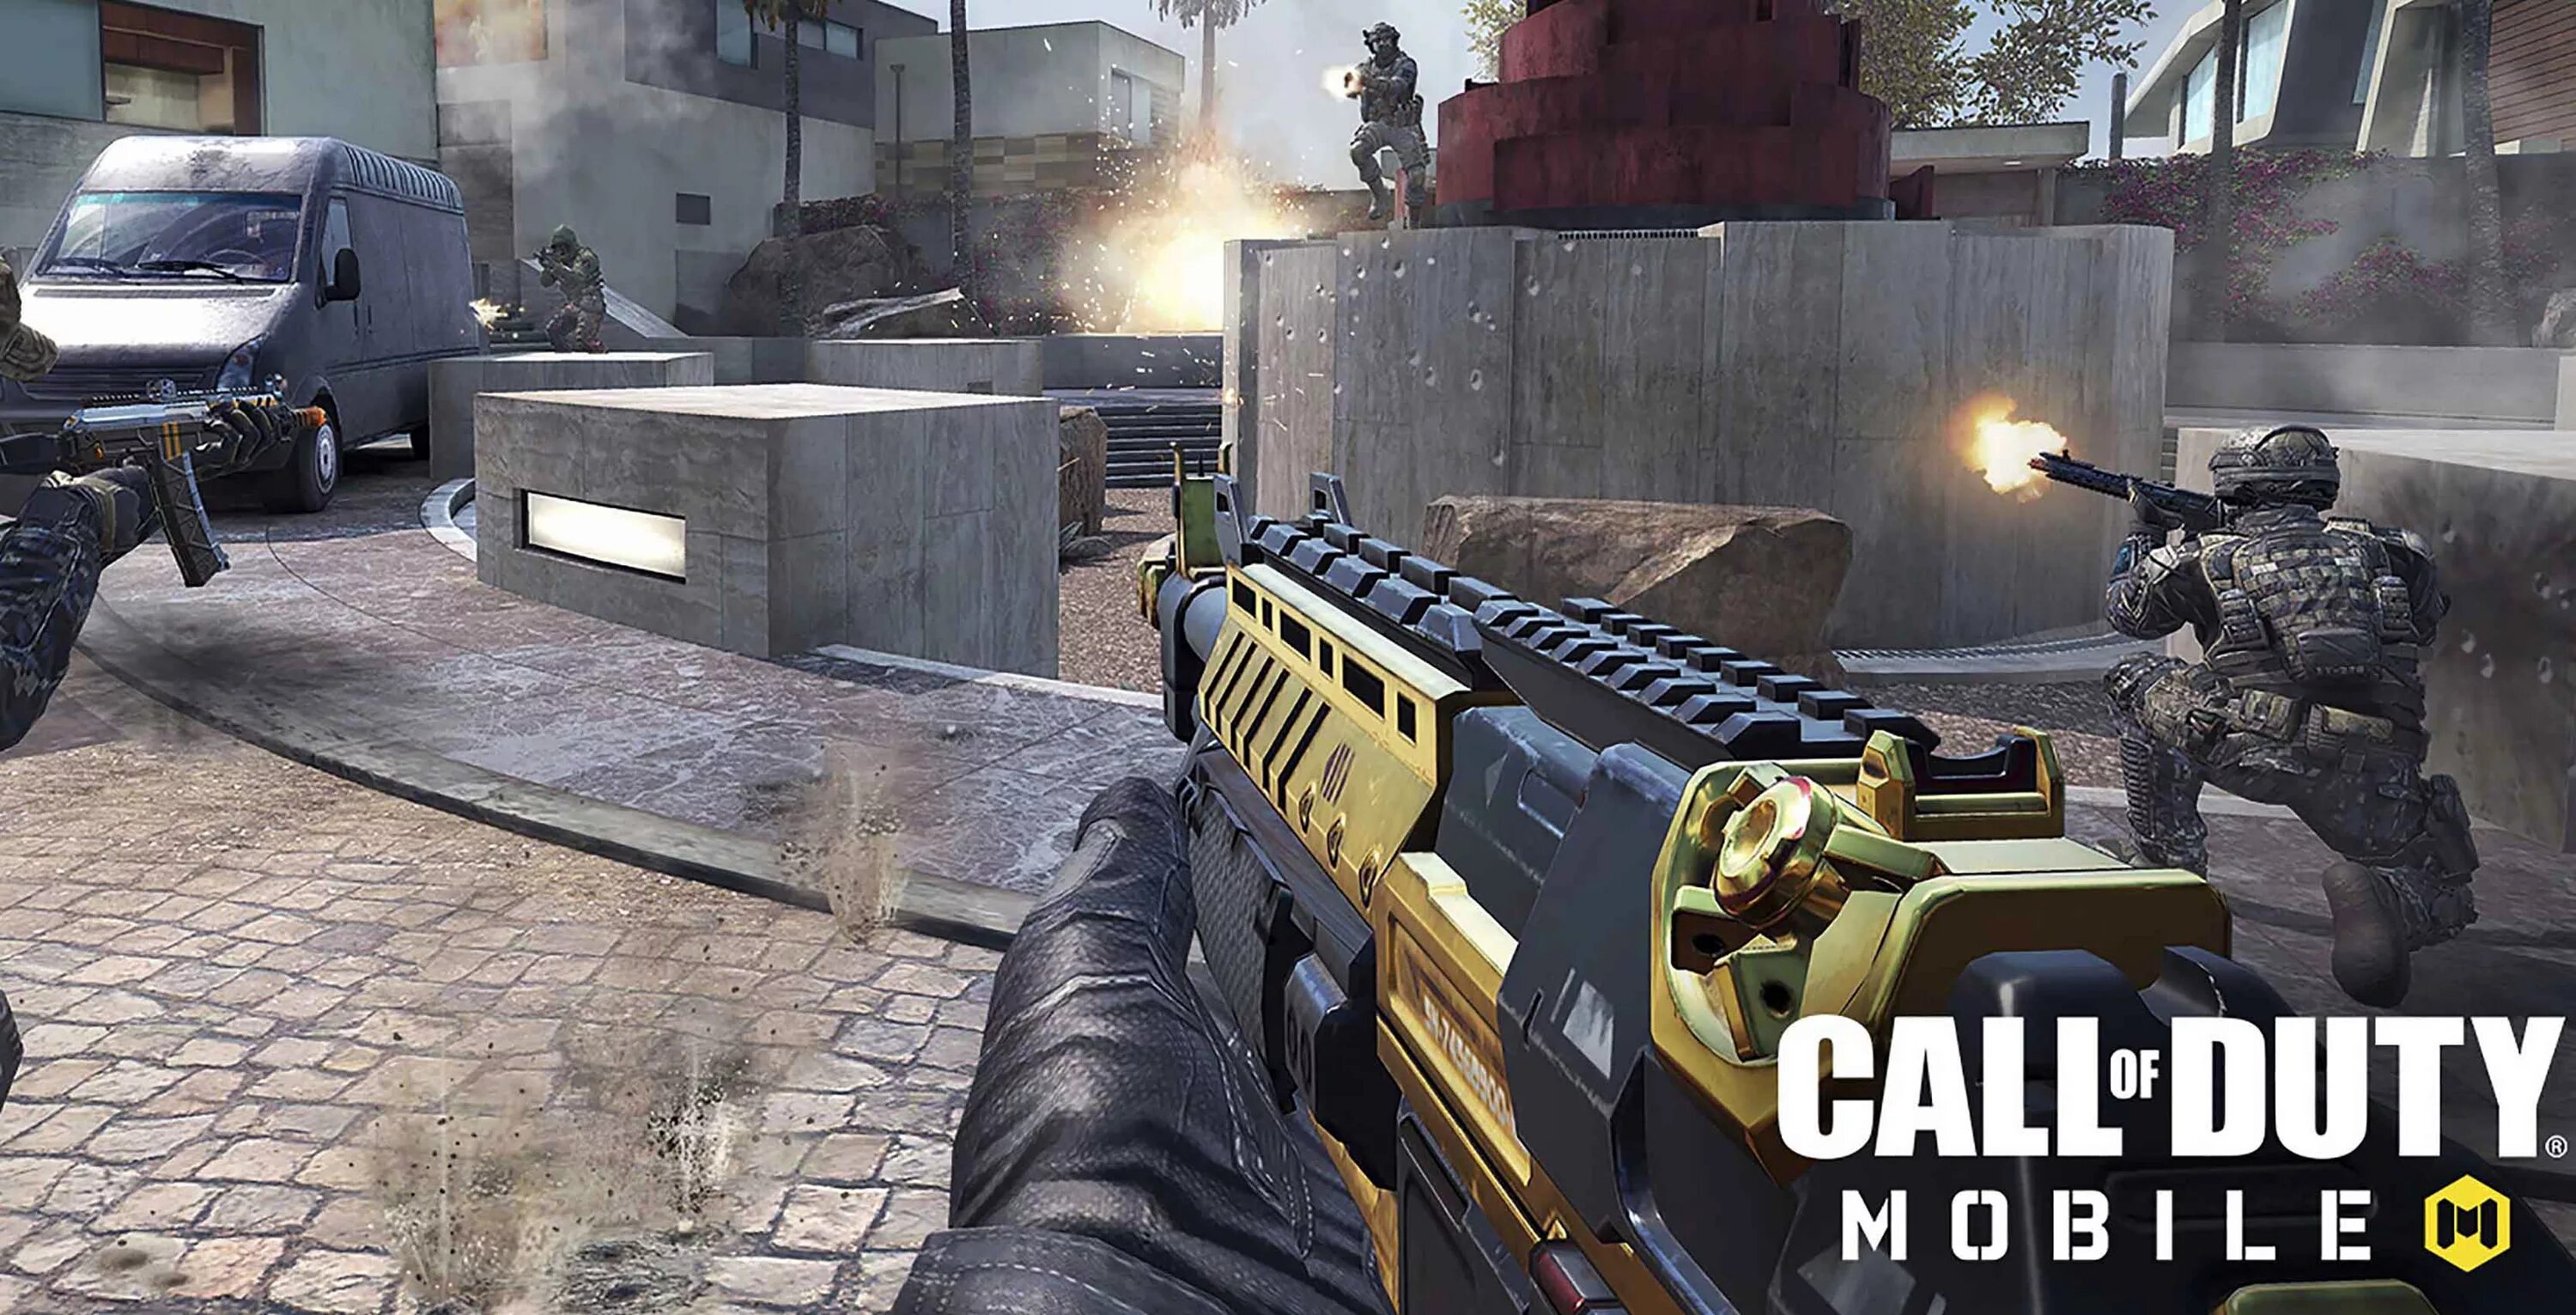 Call of Duty mobile. Игра Call of Duty mobile 2. Call of Duty mobile фото. Call of Duty 8. Call of duty mobile русская версия